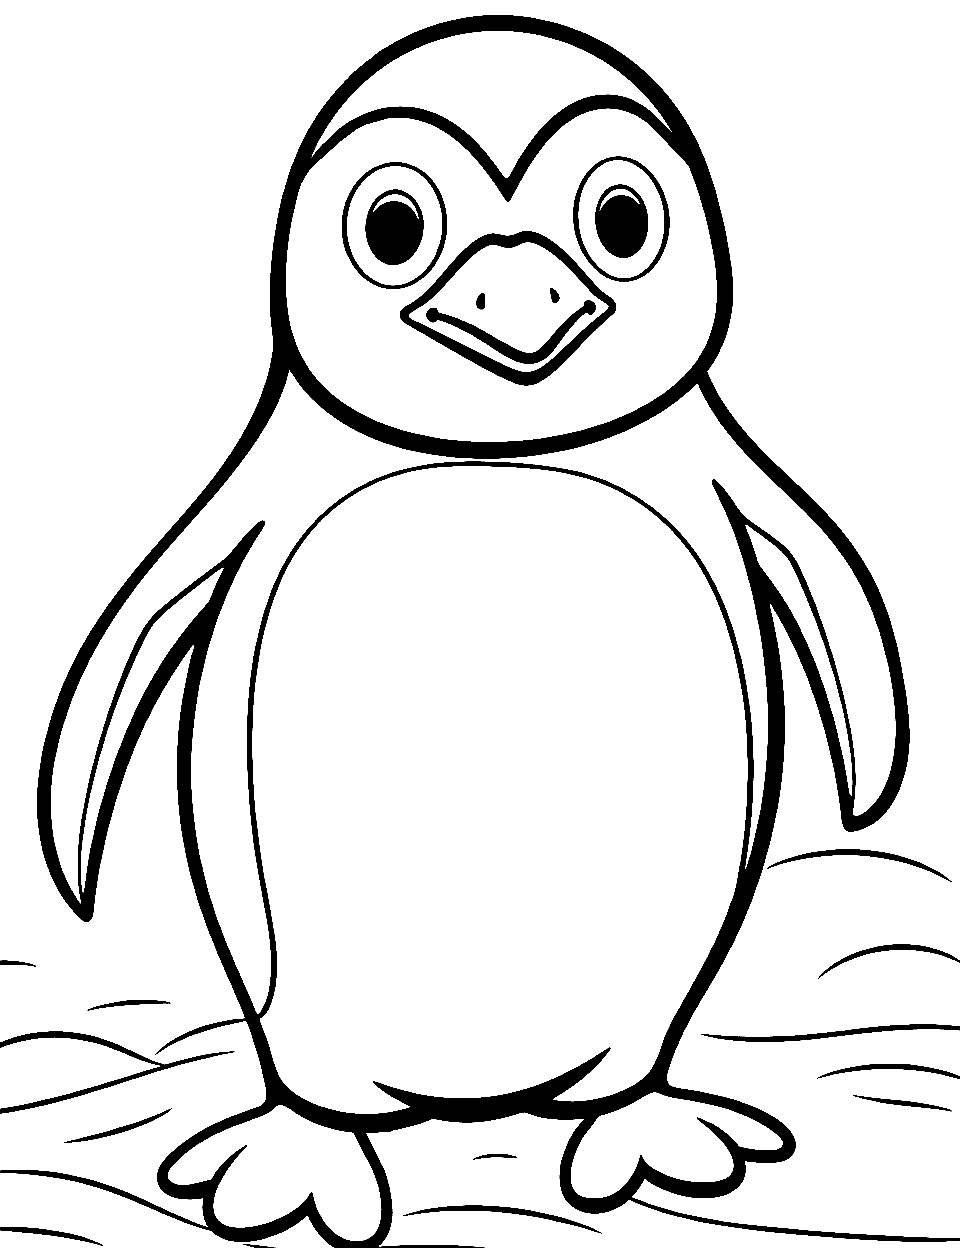 Penguin Coloring Page Drawing for Kids Graphic by MyCreativeLife · Creative  Fabrica